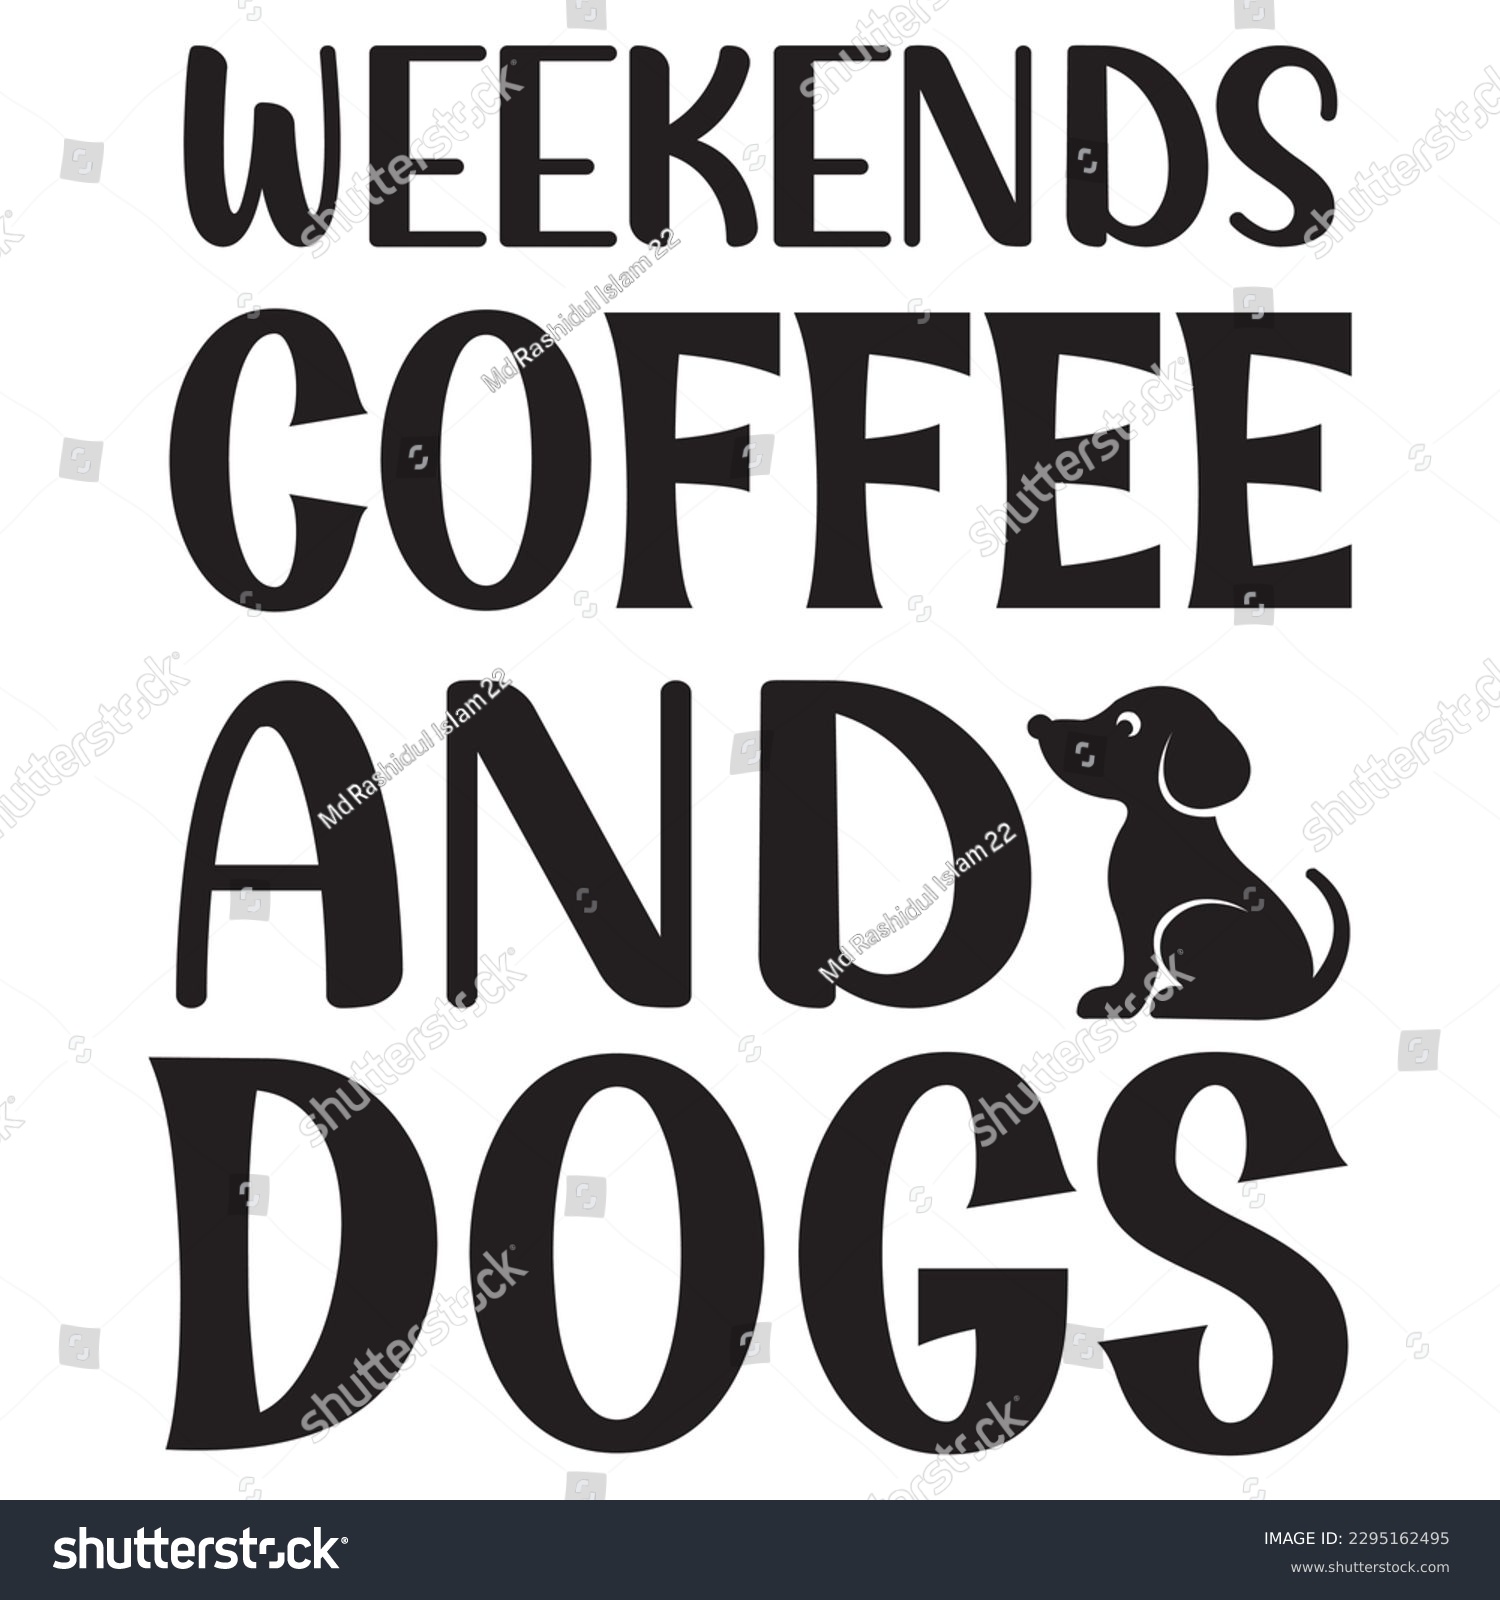 SVG of Weekends Coffee And Dogs SVG Design Vector file. svg